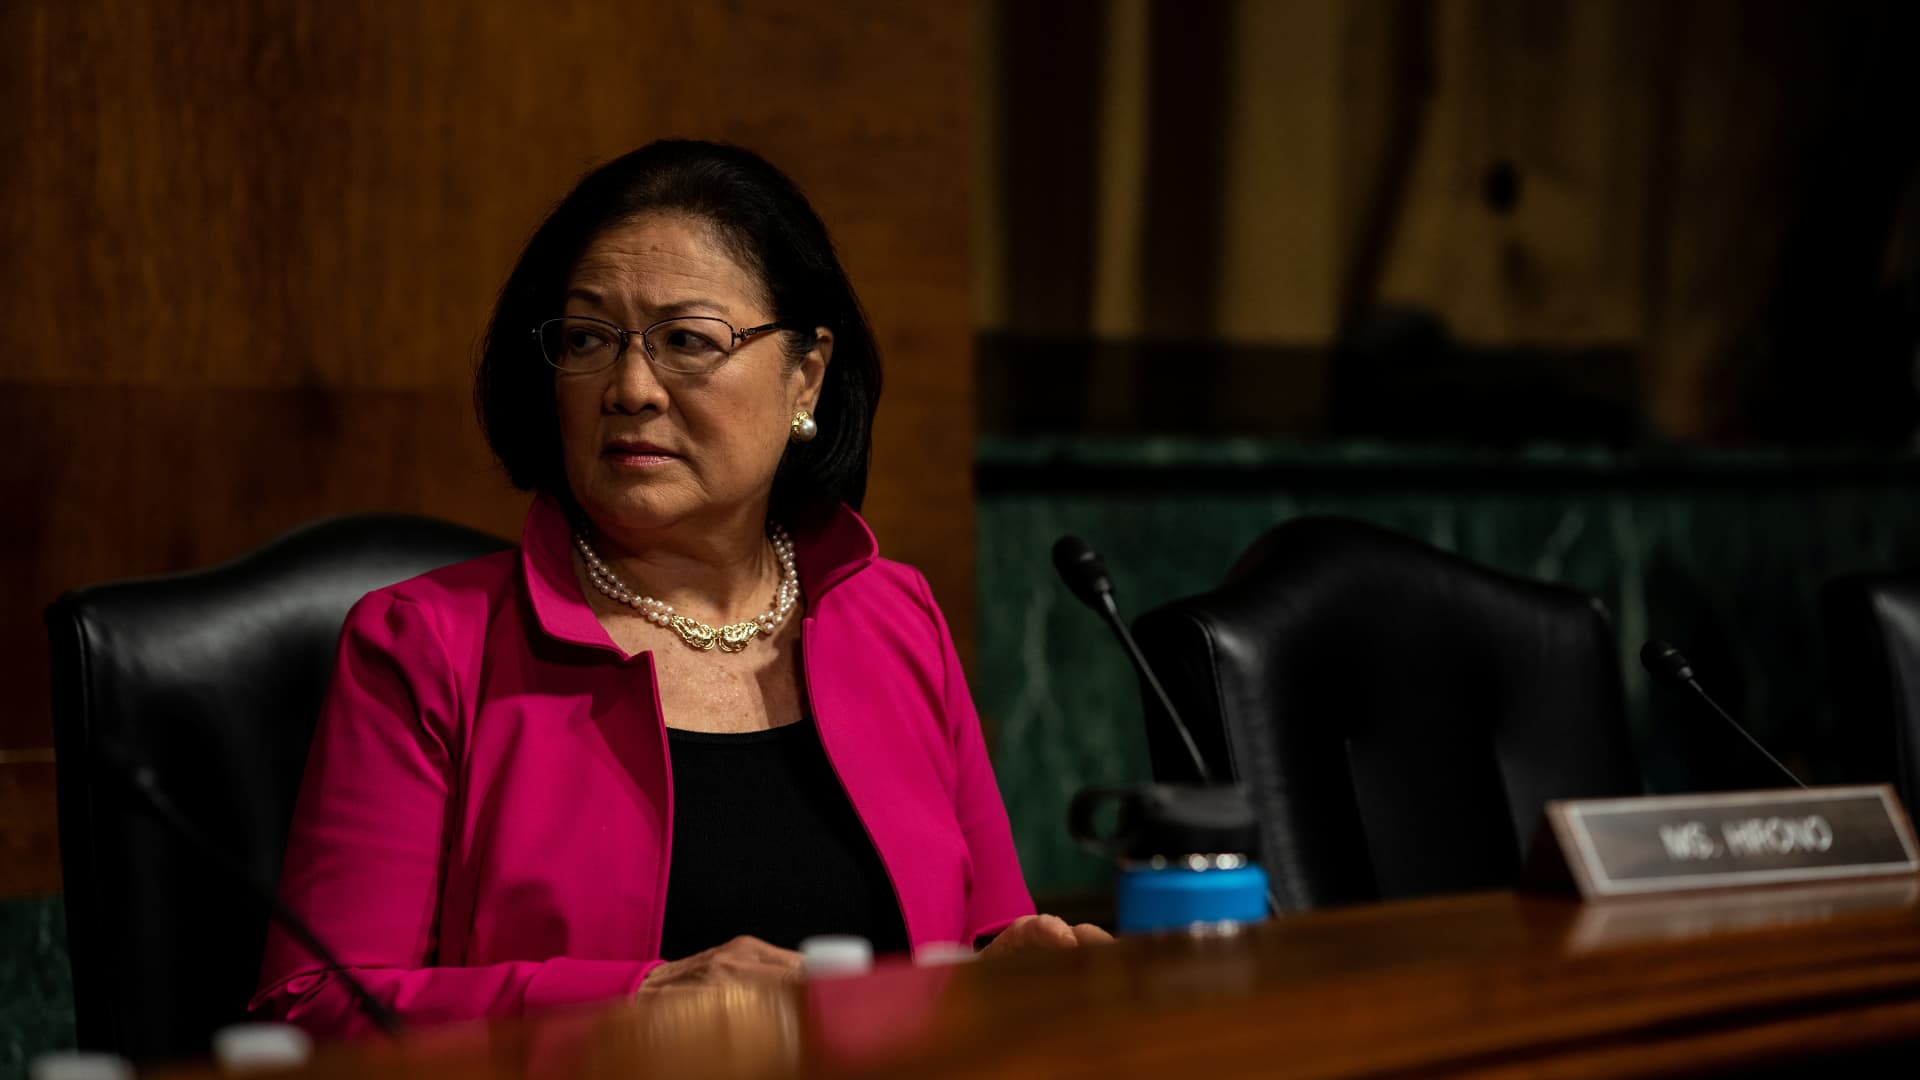 Senator Mazie Hirono attends a Senate Judiciary Committee hearing for Christine Blasey Ford to testify about sexual assault allegations against Supreme Court nominee Judge Brett M. Kavanaugh on Capitol Hill in Washington, U.S., September 27, 2018.